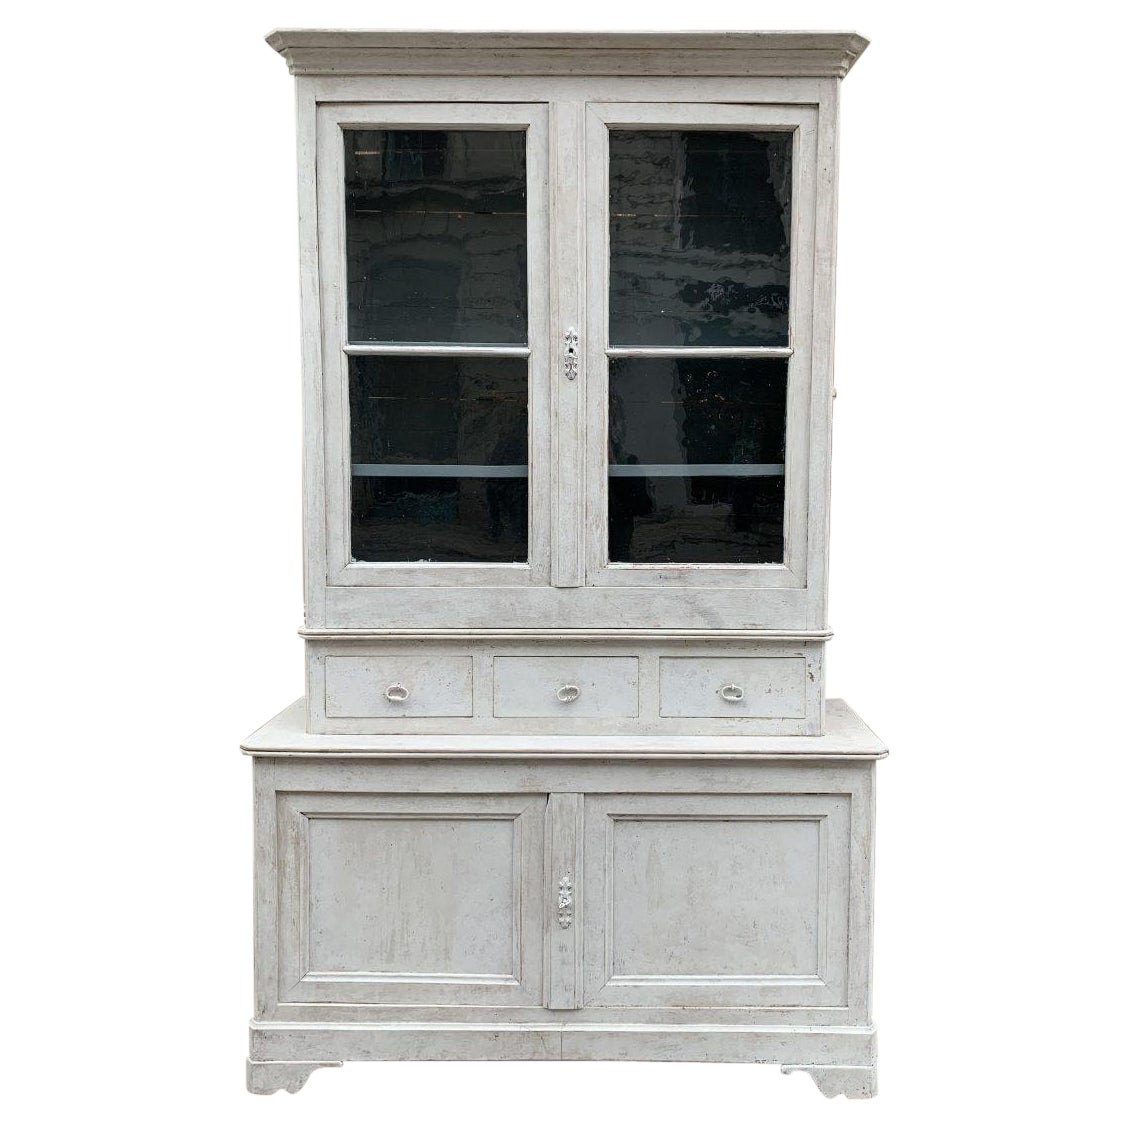 Handsome Antique 3-Part Kitchen Display Cabinet, France Early 1900